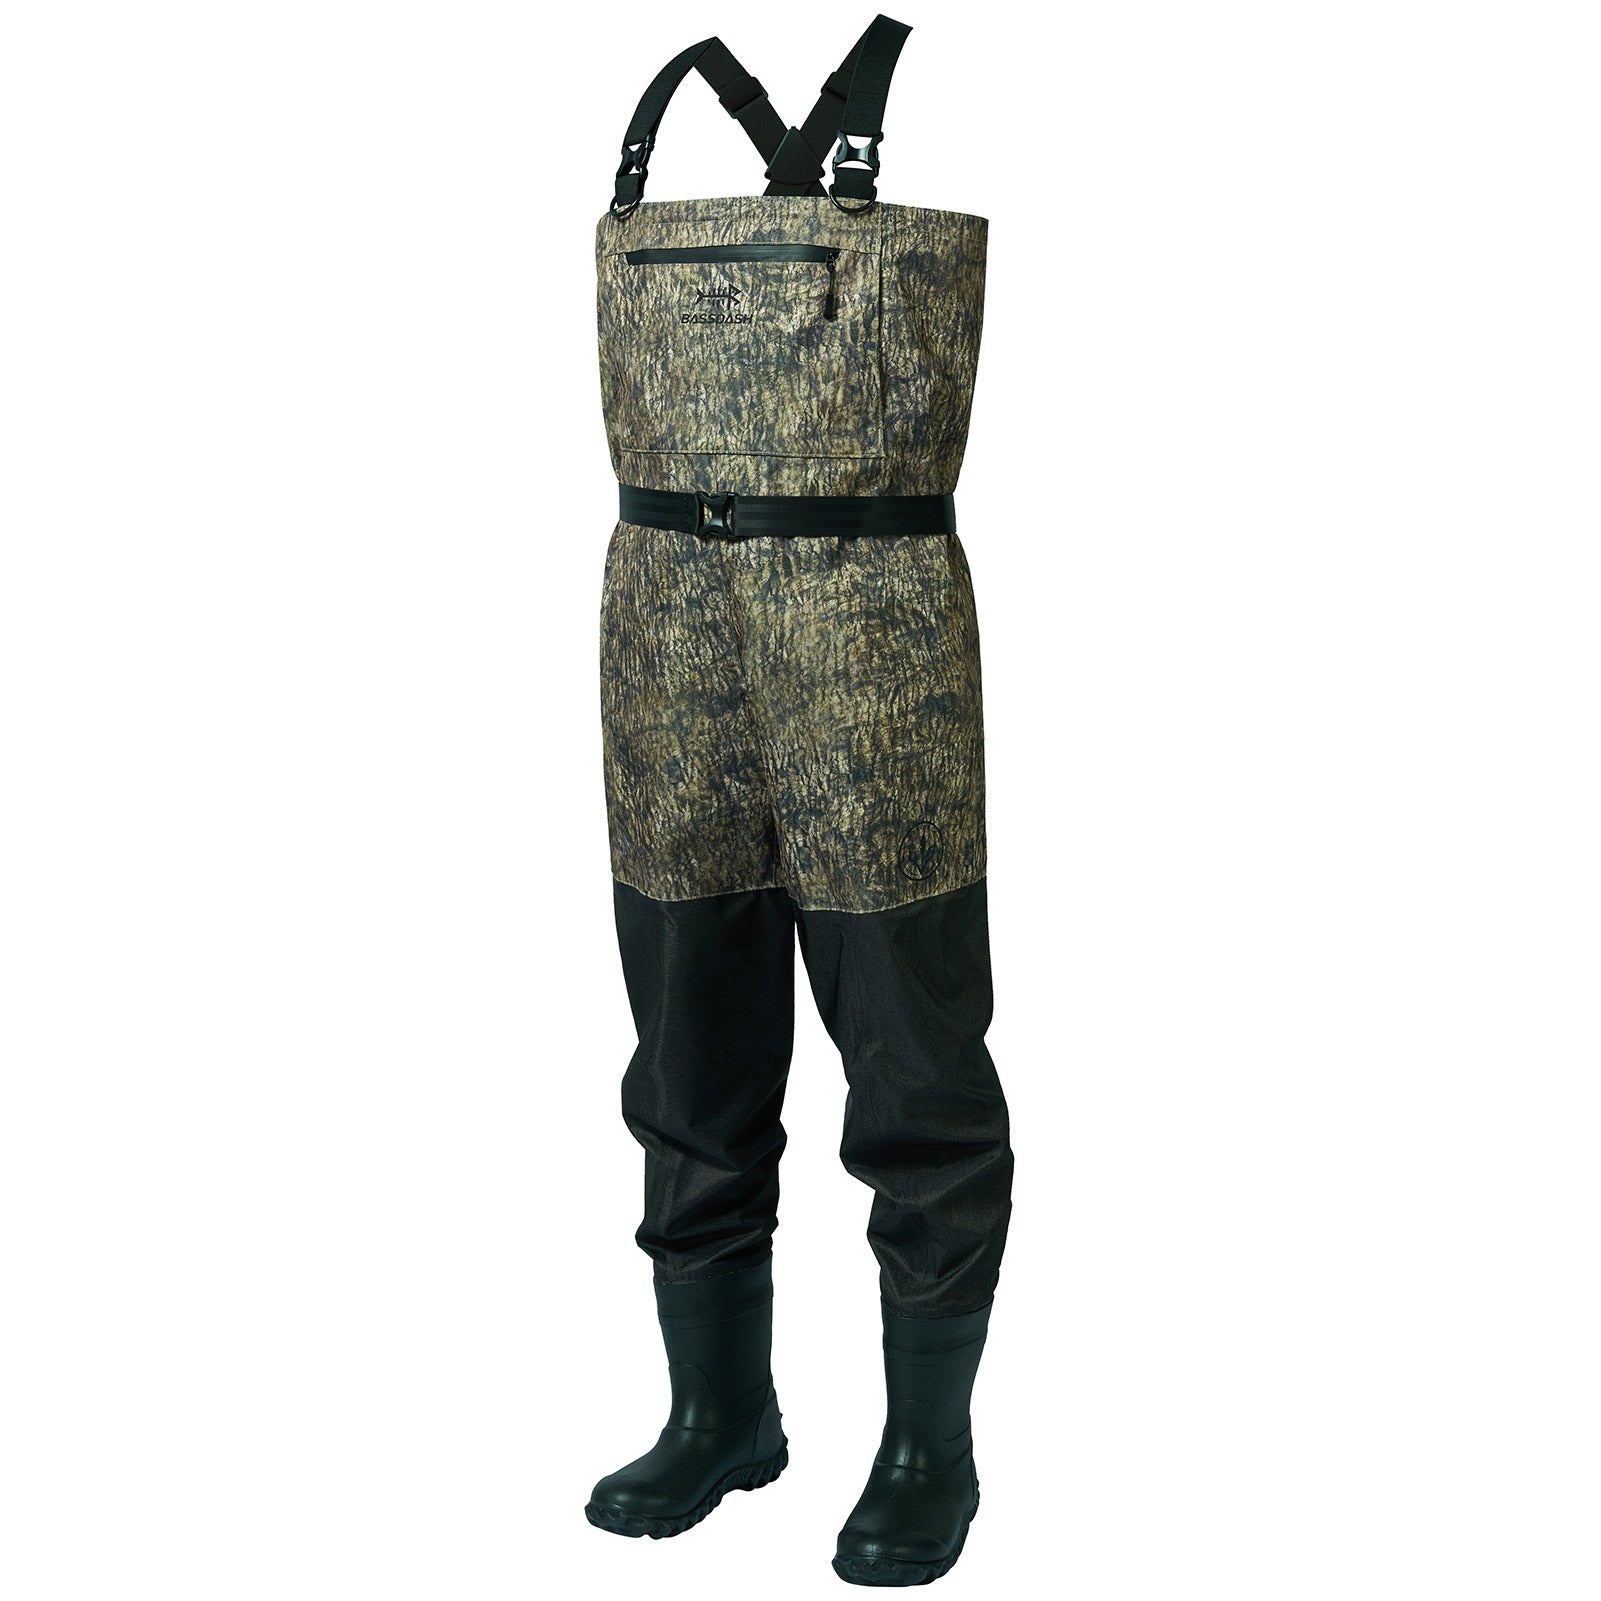 Men's Immerse Breathable Ripstop Wader - Boot Foot, Reeds / Large 9-10